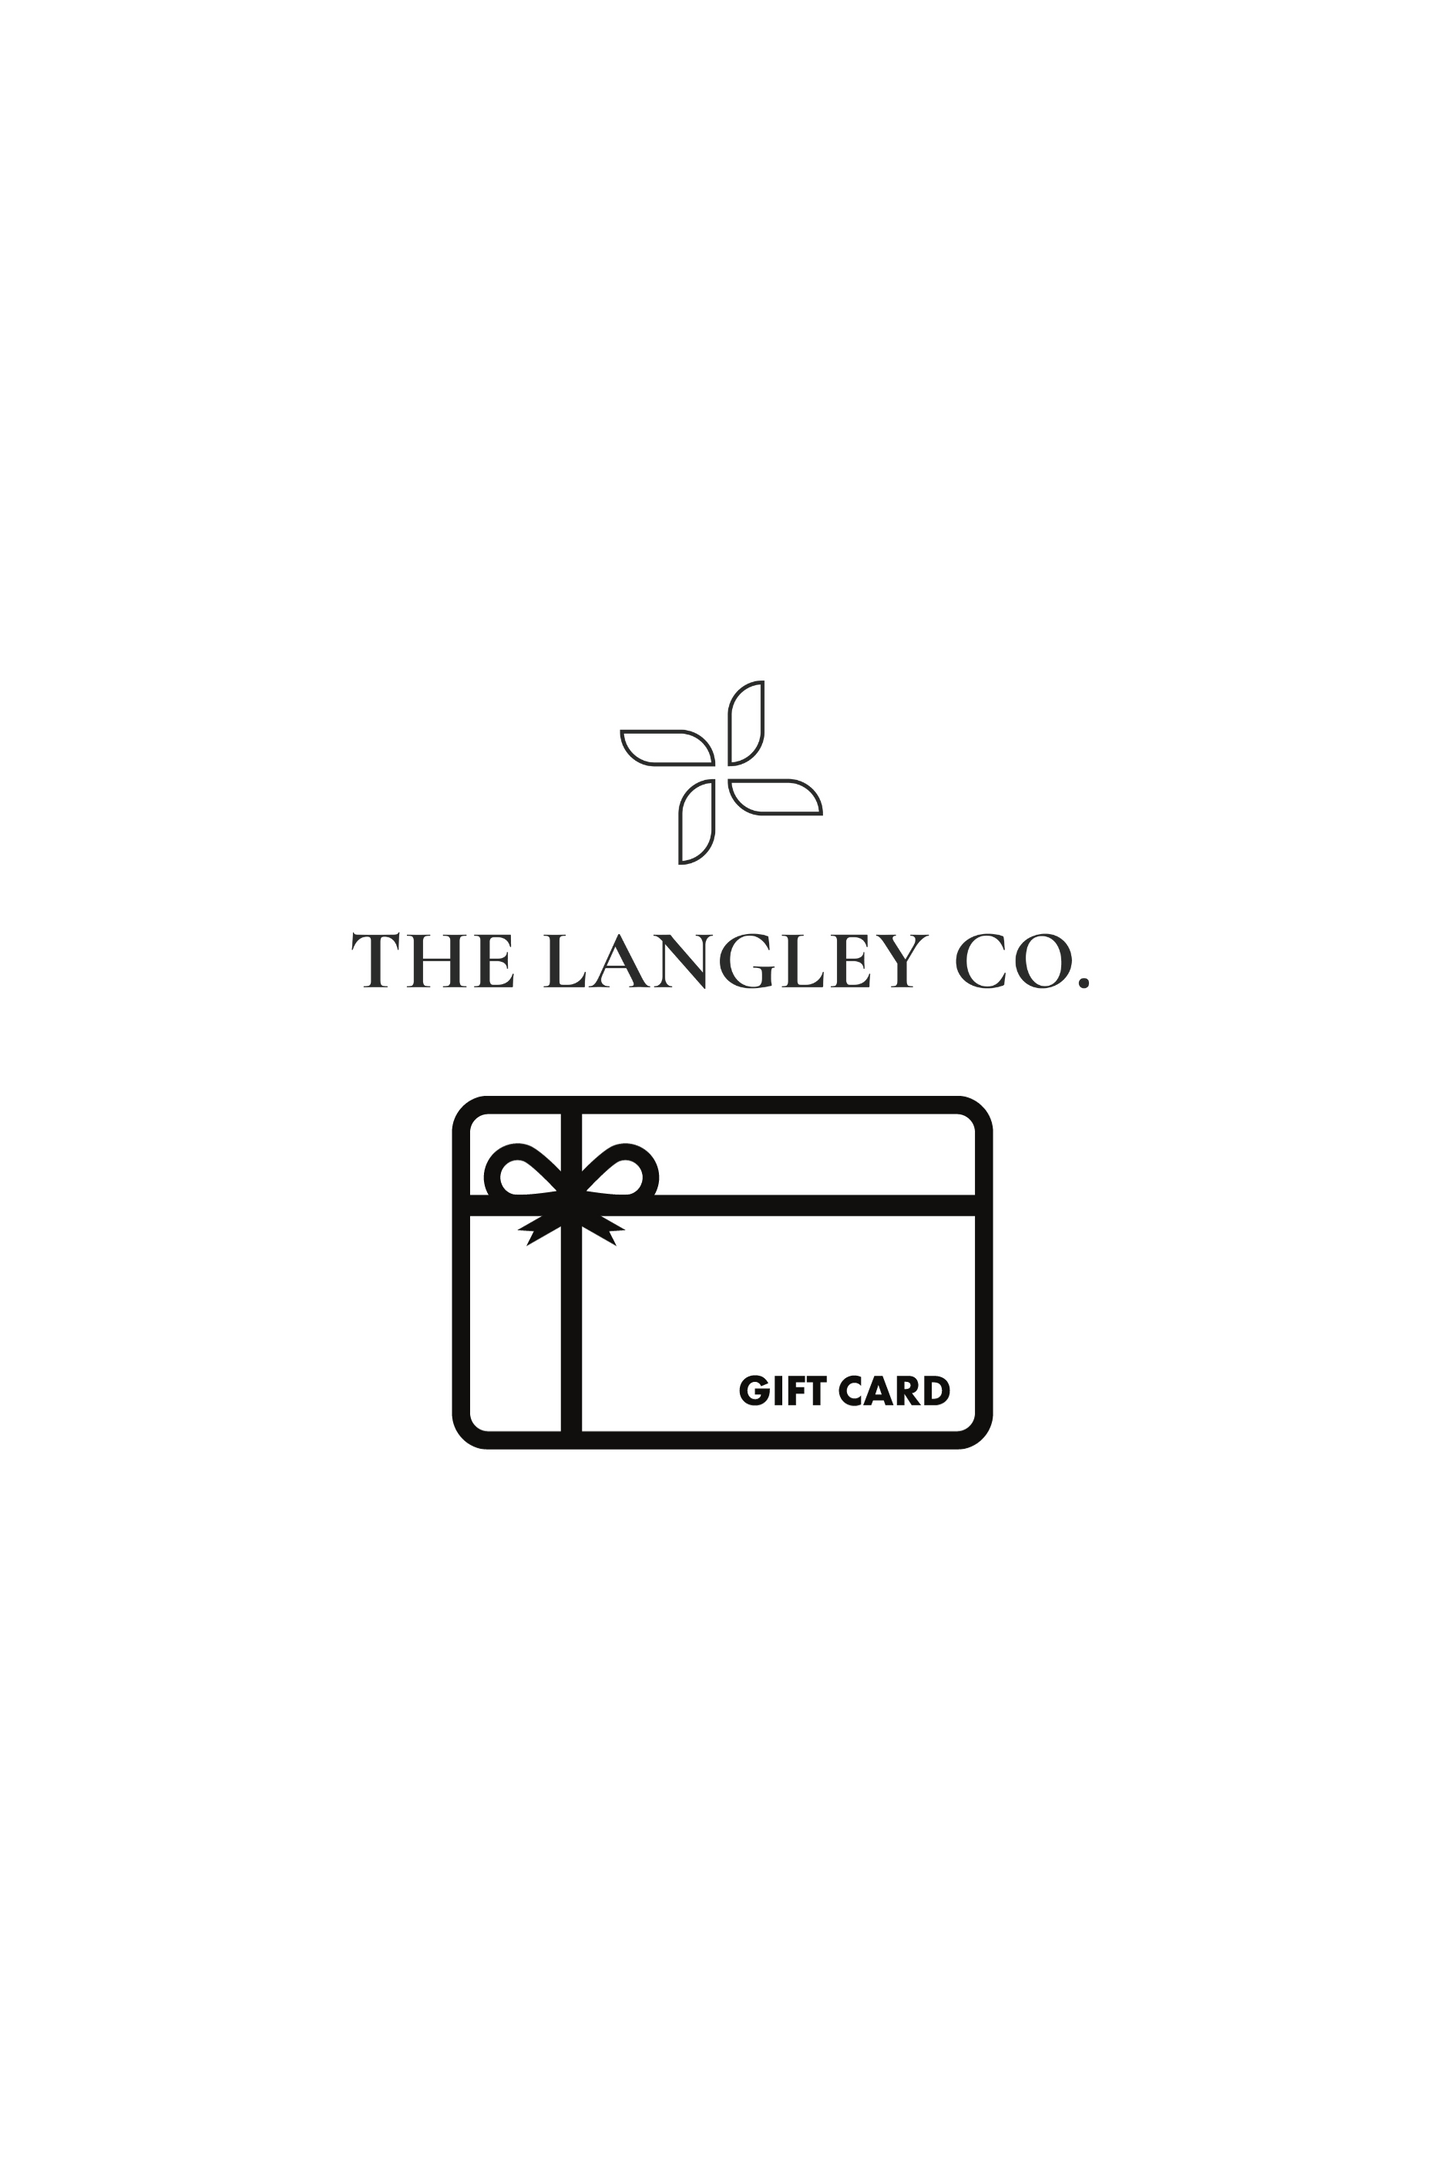 The Langley Co. Gift Card